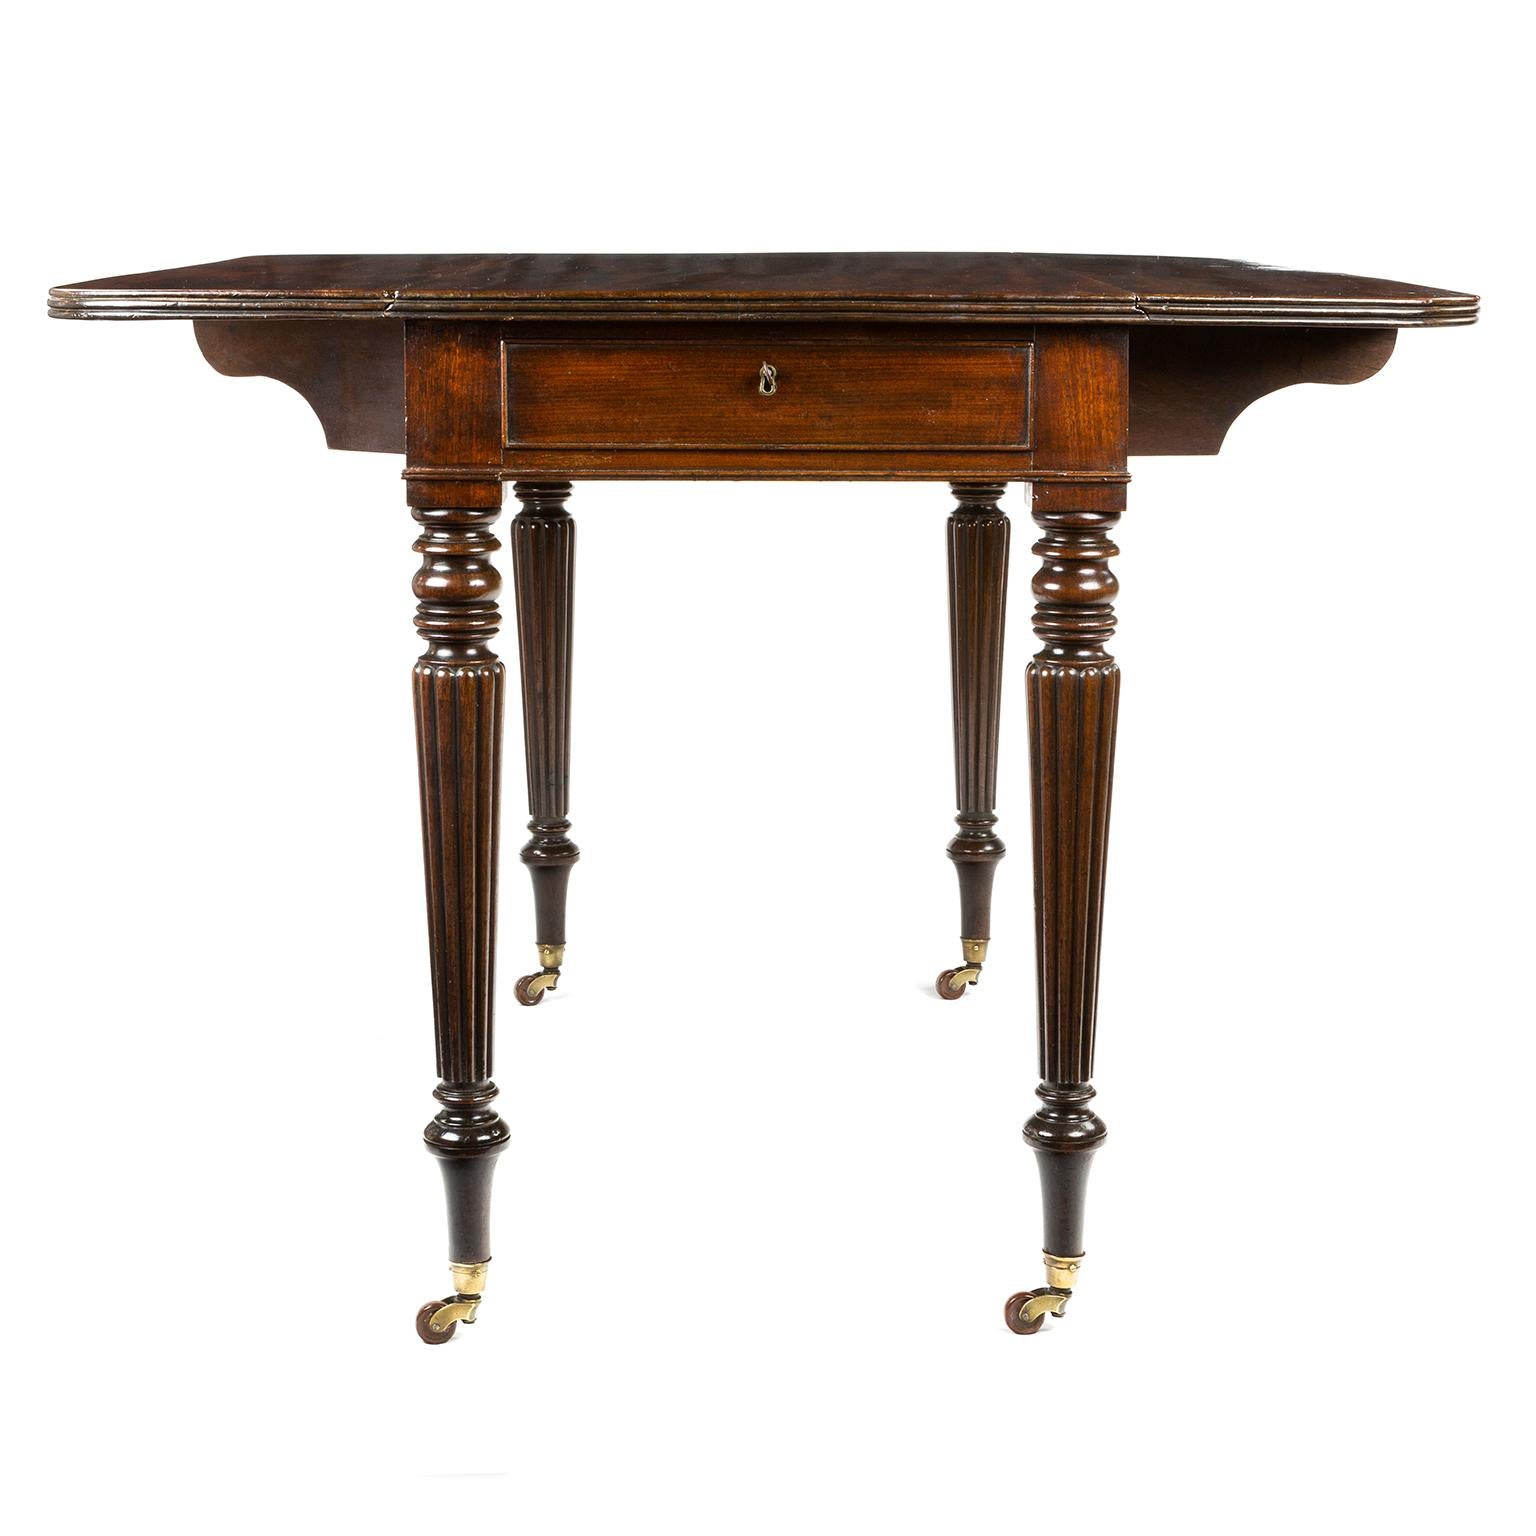 A fine quality Gillows of Lancaster and London mahogany pembroke table, signed, George IV period.

Gillows of Lancaster and London, also known as Gillow & Co., was an English furniture making firm based in Lancaster, Lancashire, and in London. It